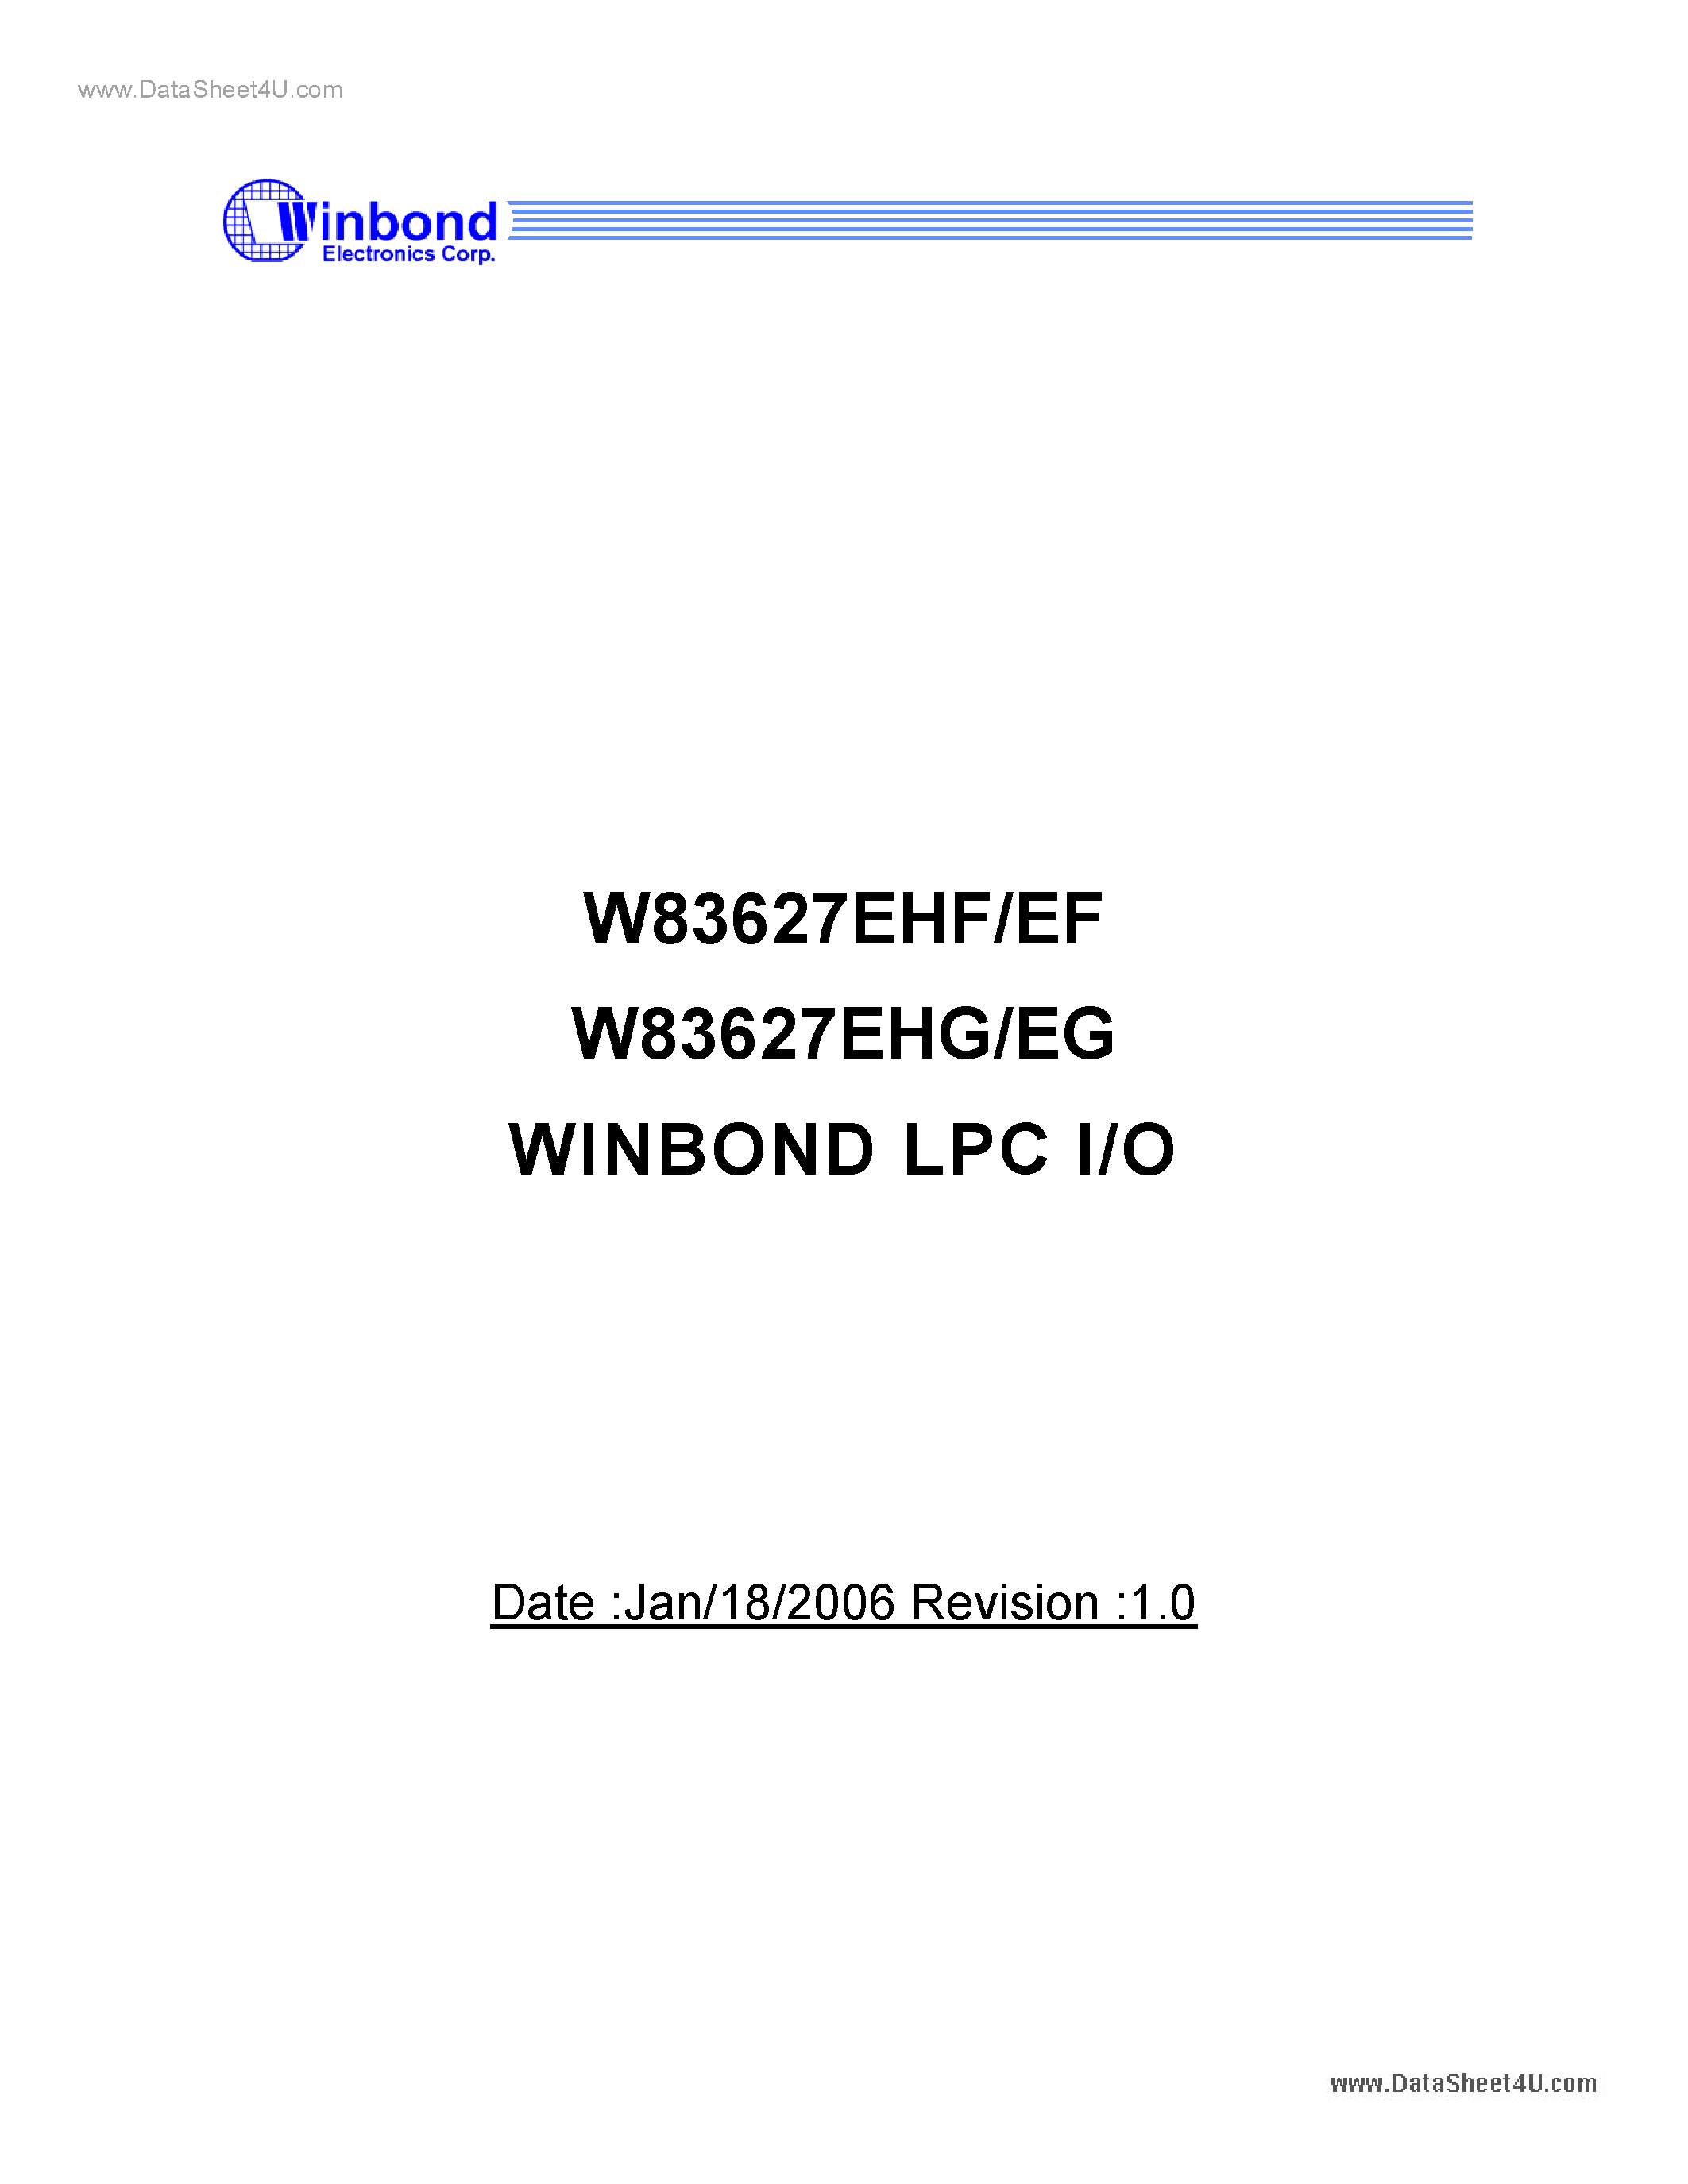 Datasheet W83627EEF - evolving product from Winbonds most popular I/O family page 1